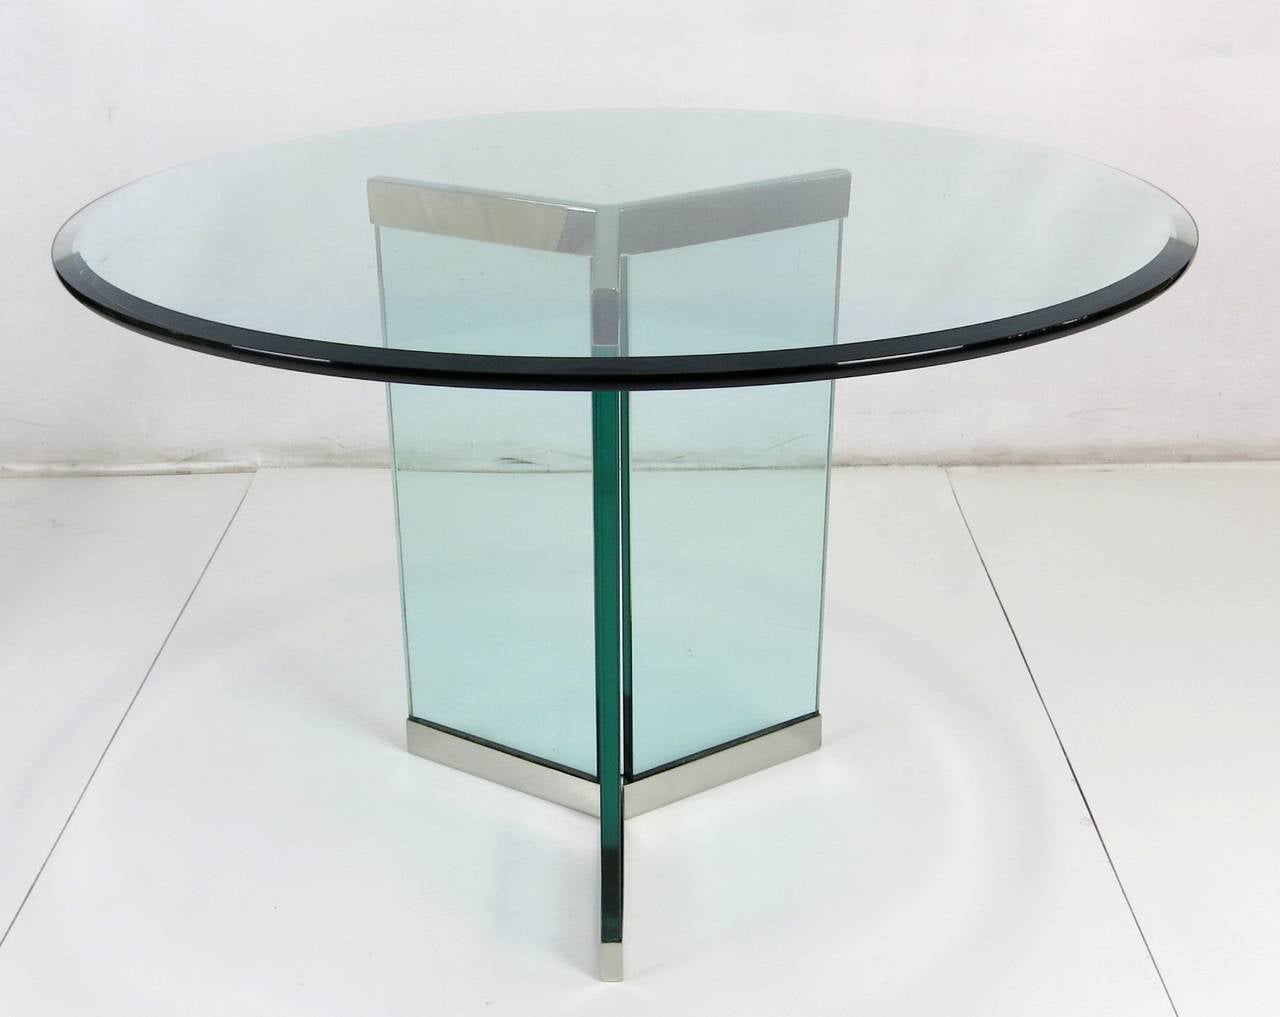 Pair of delta form table bases in mirror polished stainless steel fixtures holding sheets of 3/4